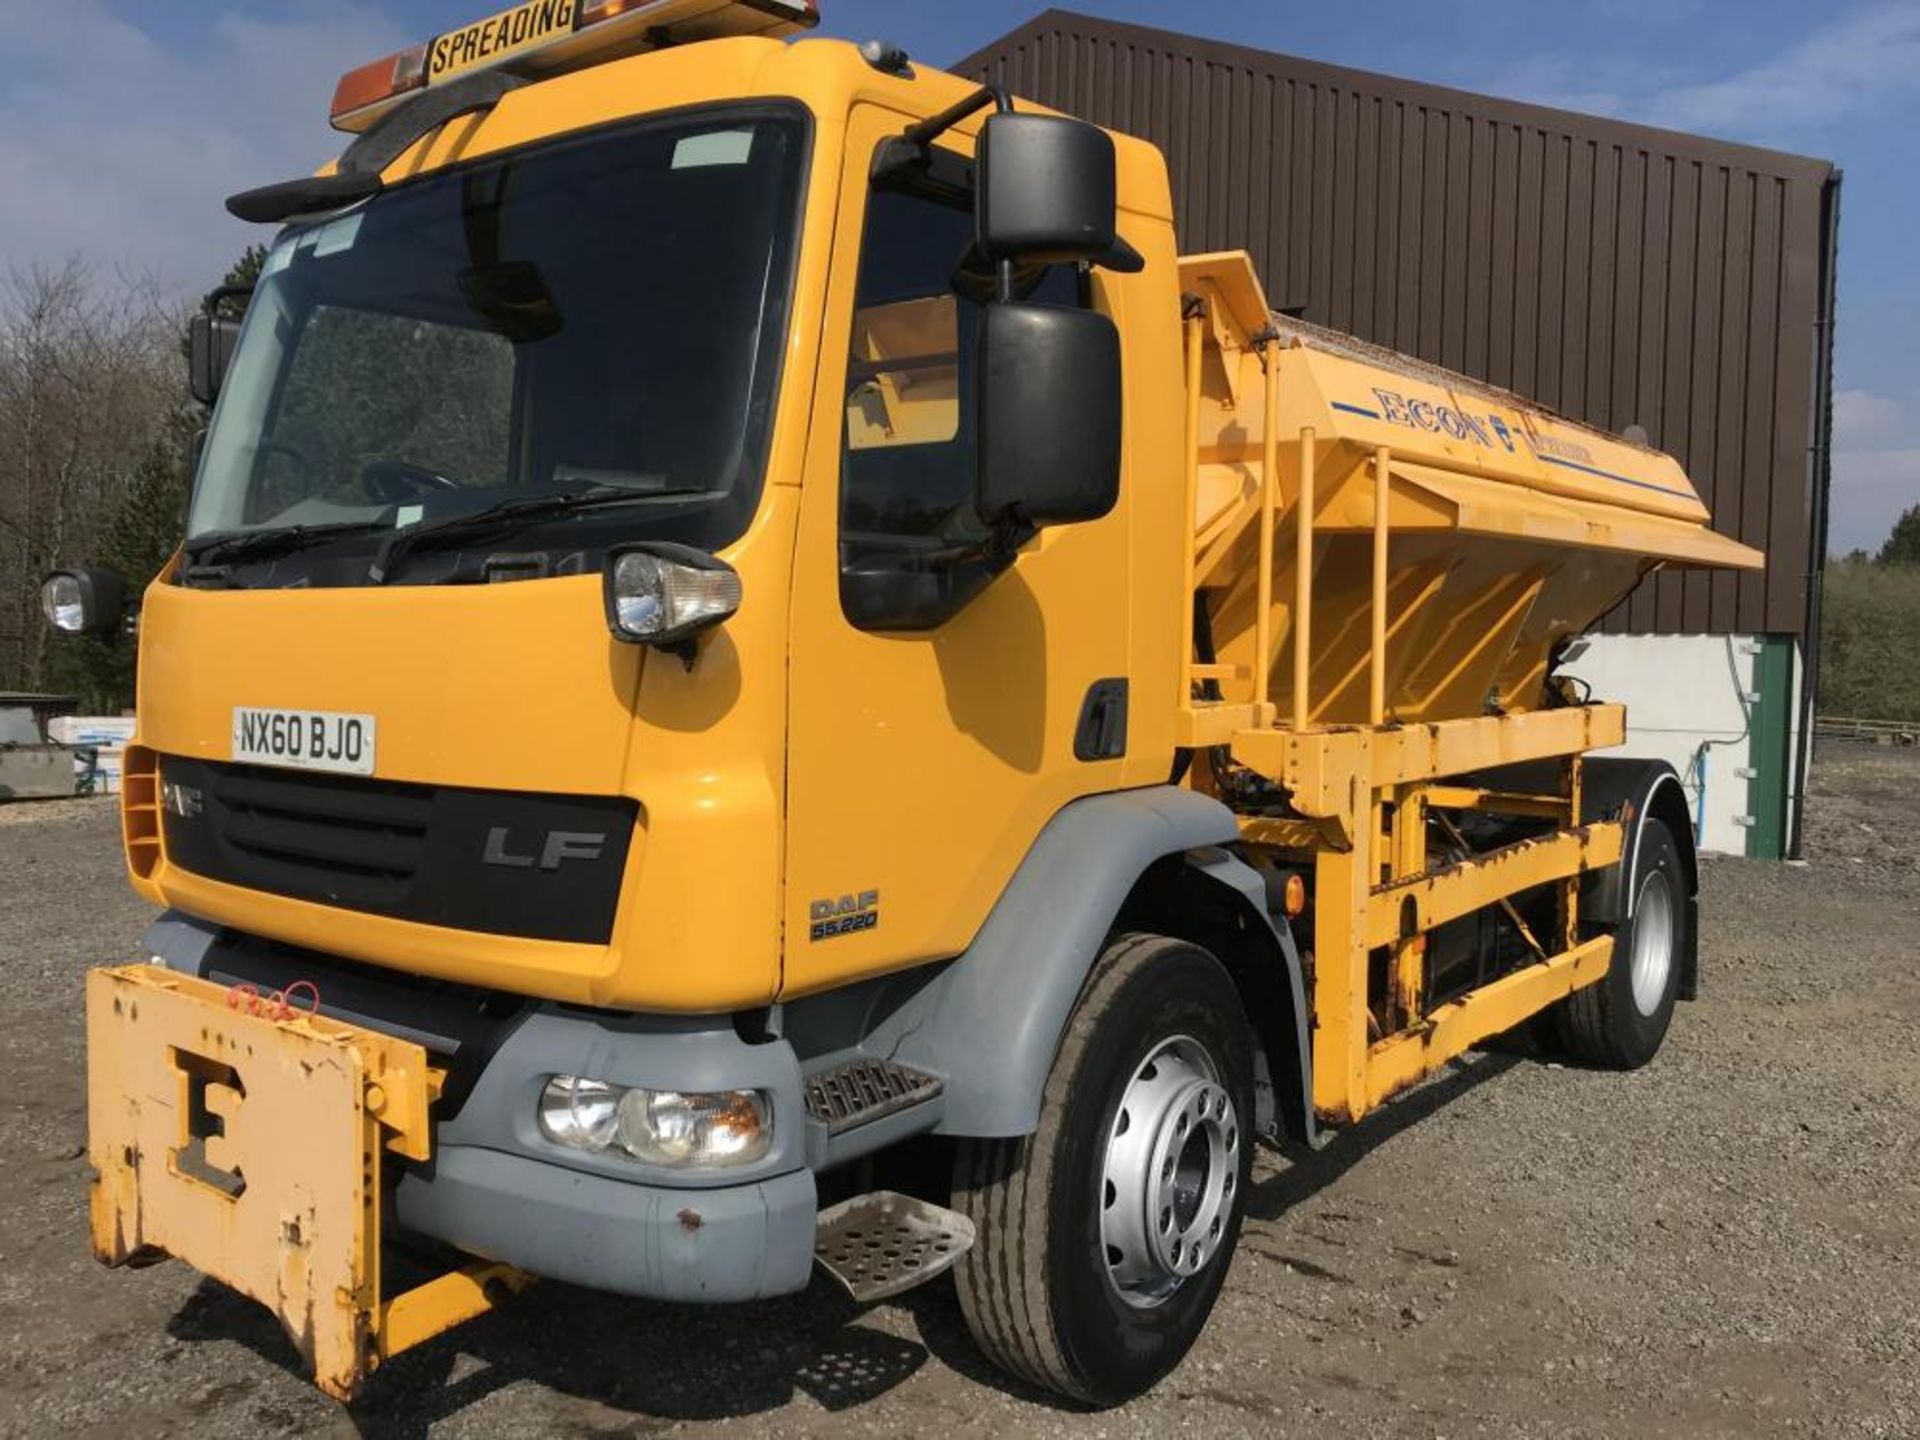 2010/60 REG DAF TRUCKS LF FA 55.220 18 TON GRITTER EX COUNCIL ECON BODY SPREADER MANUAL GEARBOX - Image 2 of 14